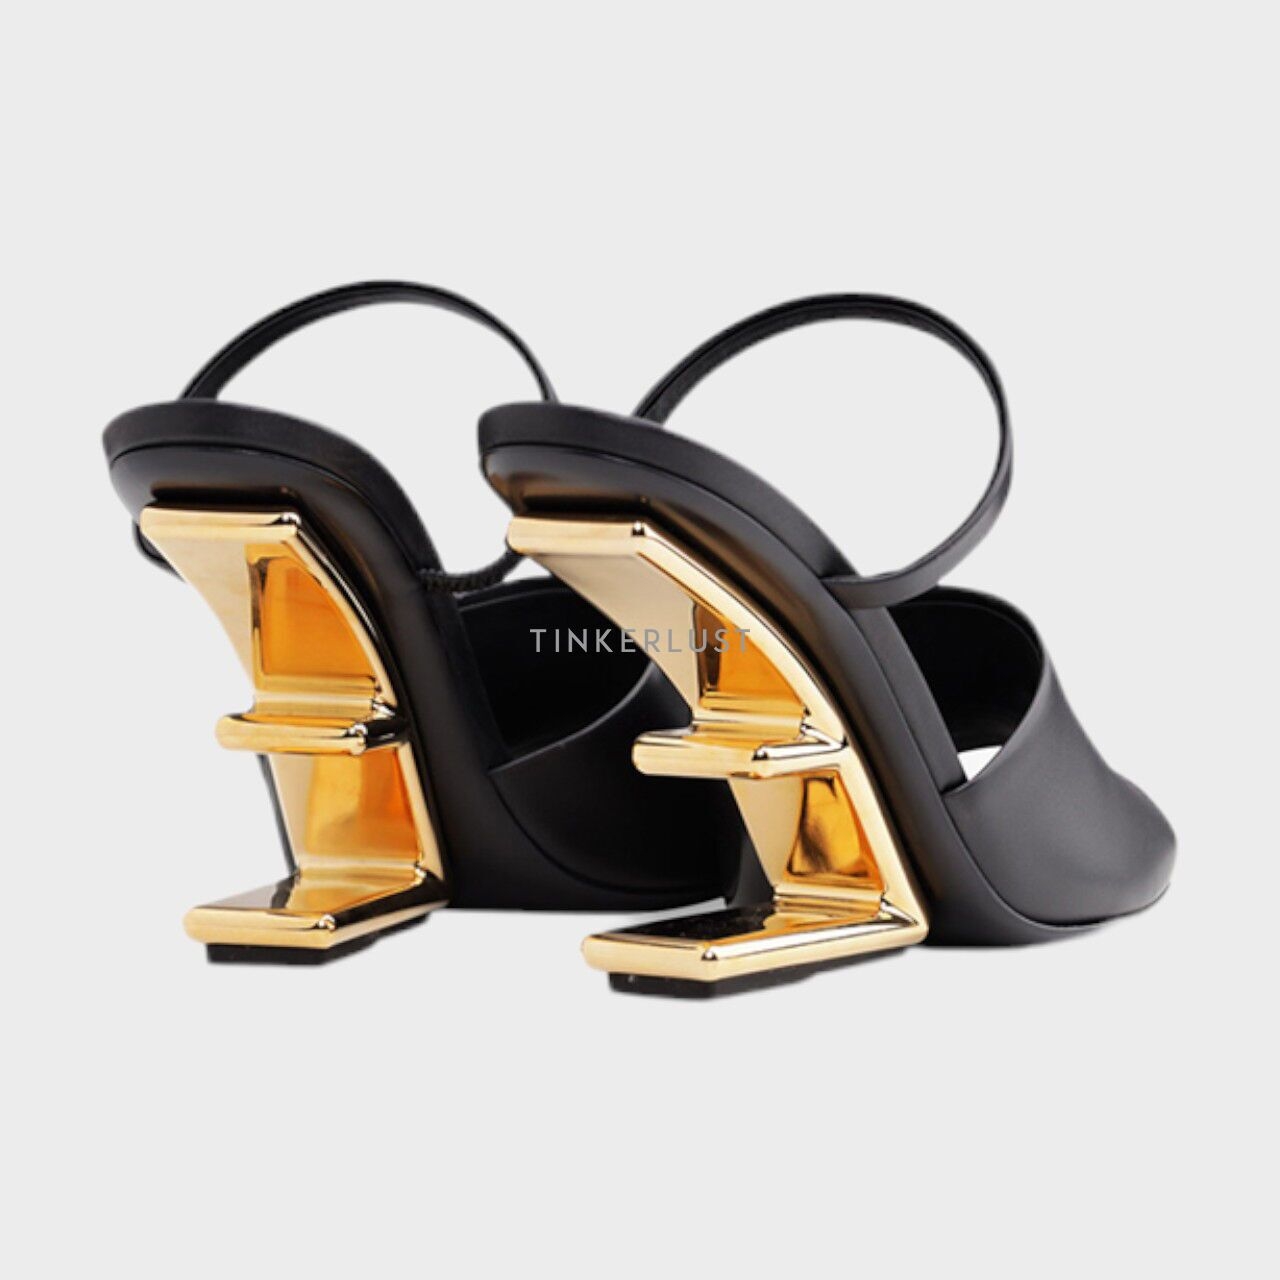 Fendi Women First Open Toe Sandals 65mm in Black Leather with Diagonal F-Shaped Heels